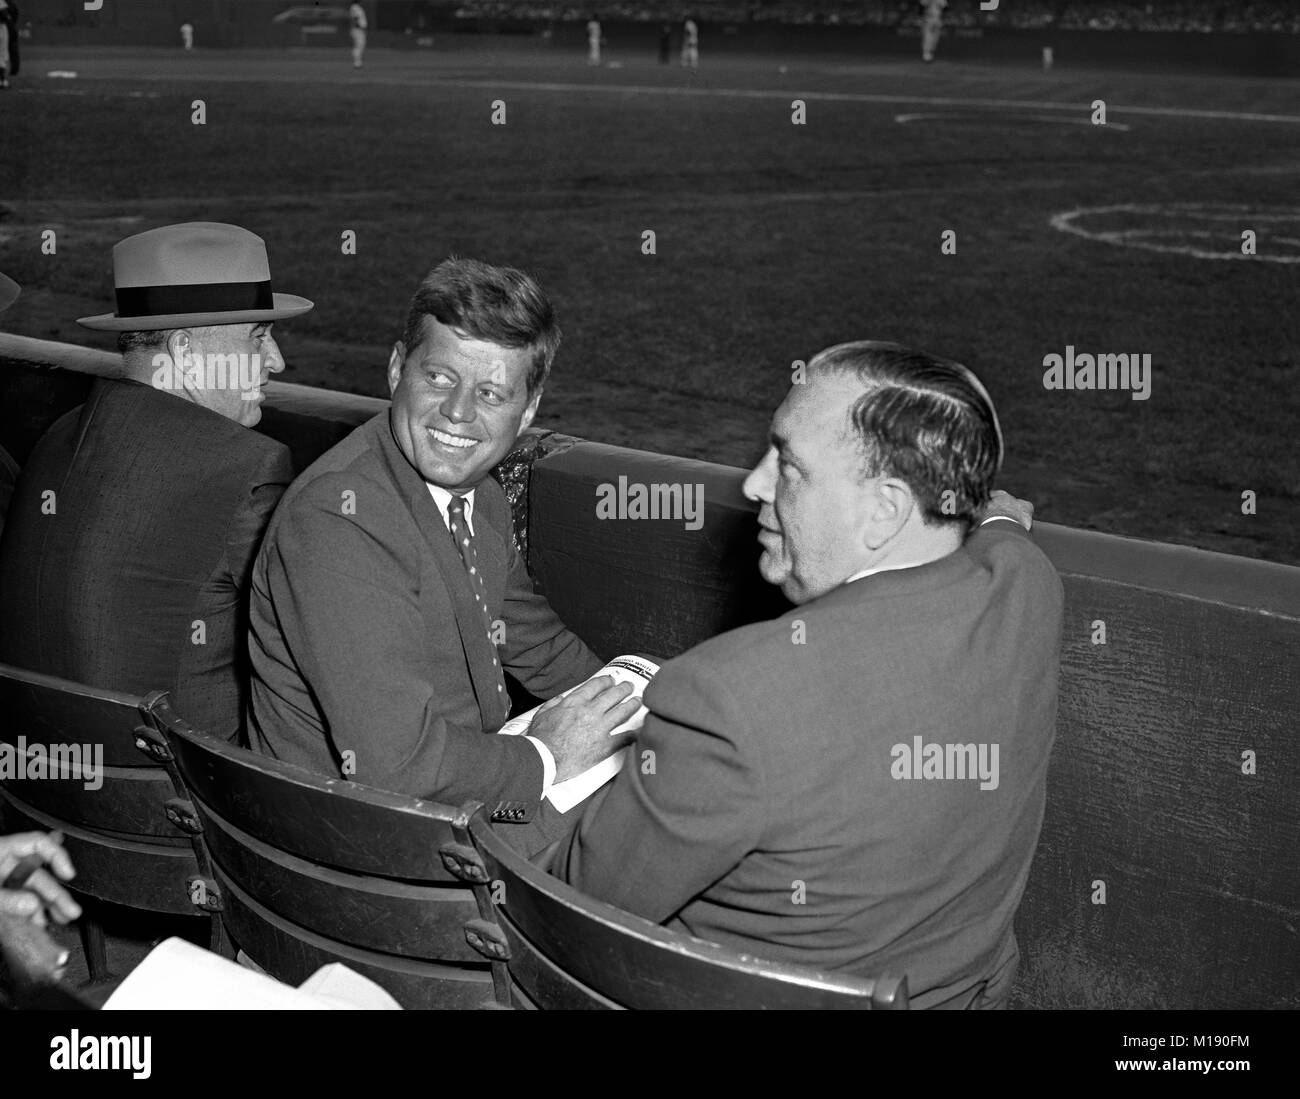 Senator John Kennedy with Mayor Richard J. Daley and Commissioner of Baseball Happy Chandler at the 2nd game of the World Series. Chicago, Comiskey Park. Oct. 2, 1959.    Dodgers 4 - Sox 3. Stock Photo